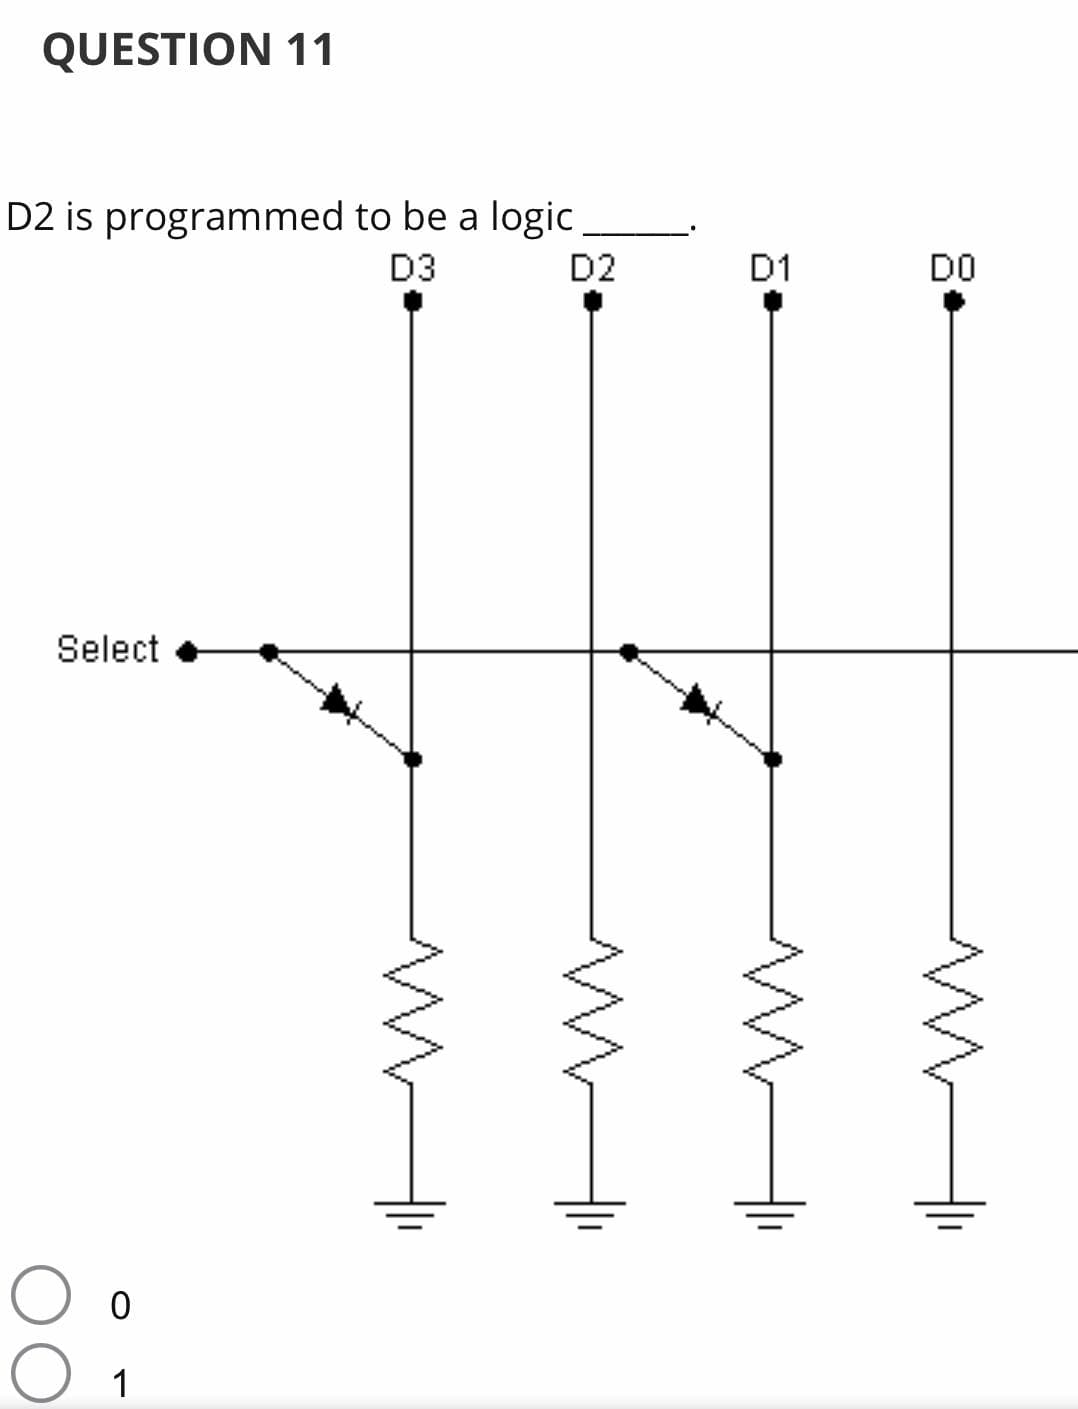 QUESTION 11
D2 is programmed to be a logic
D3
D2
D1
DO
Select
1
